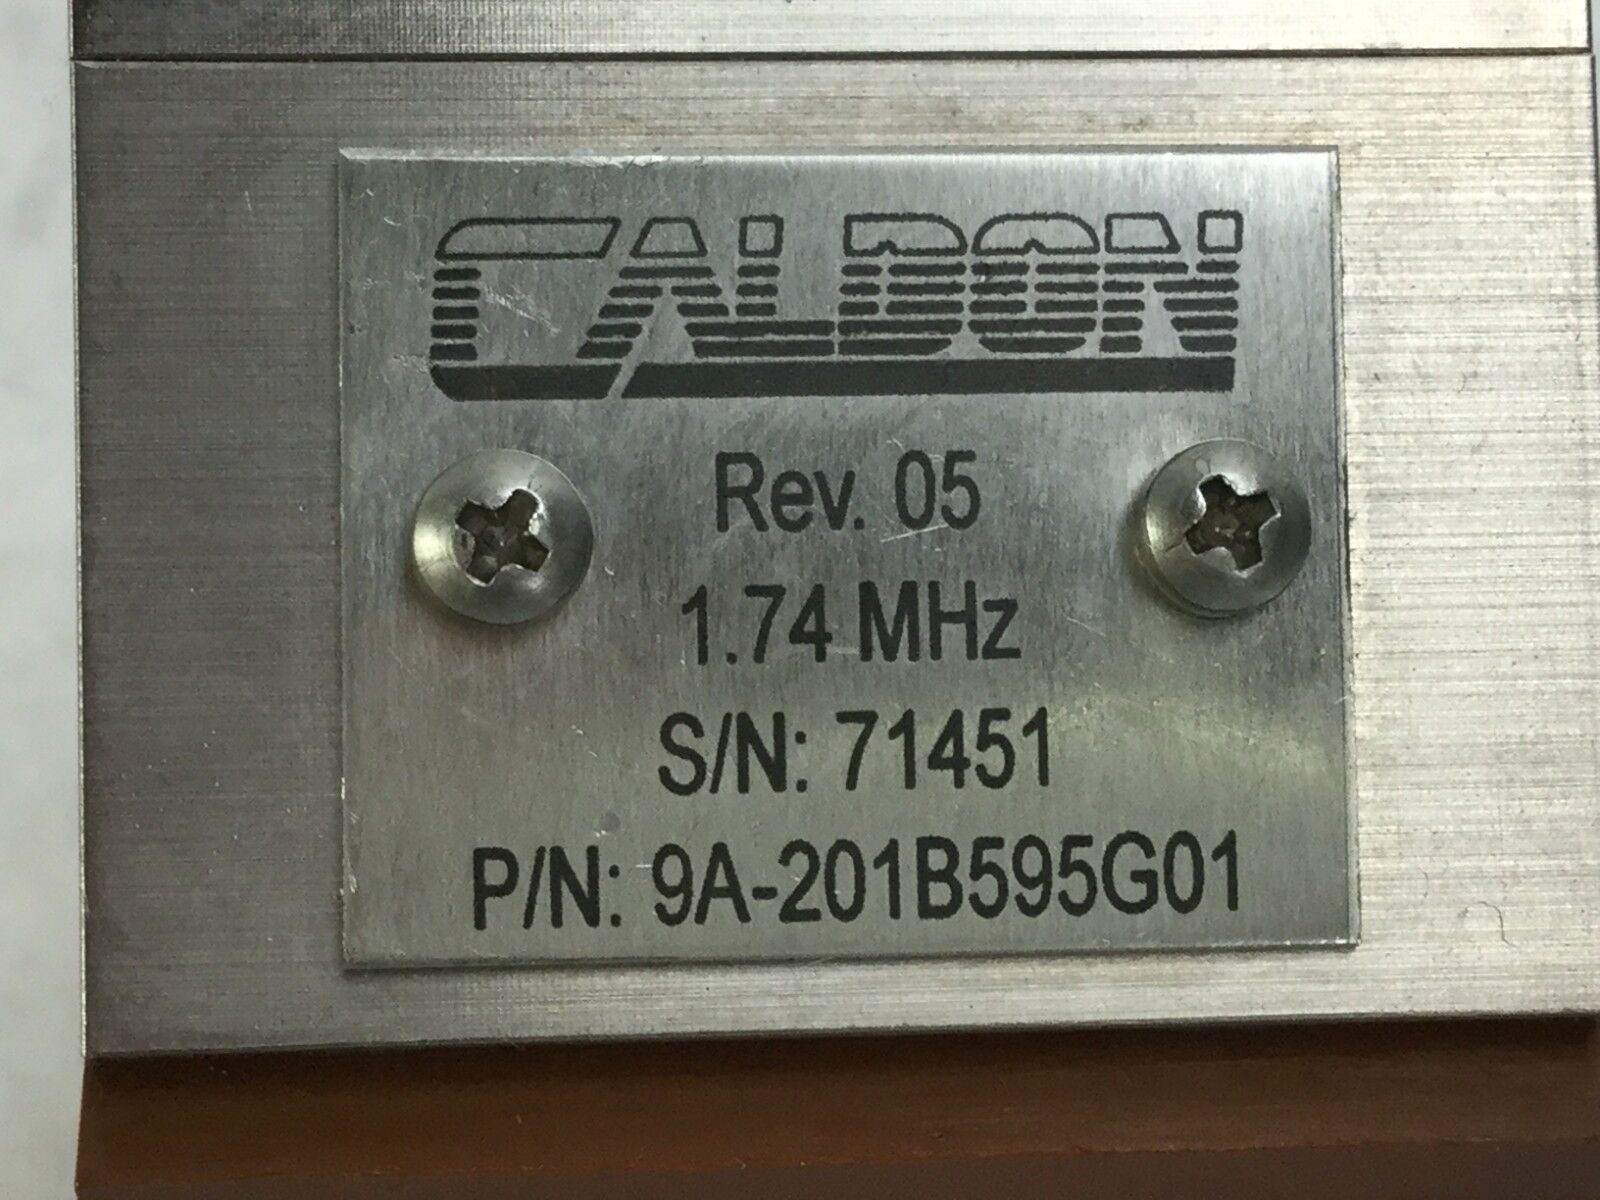 Caldon 9A-201B595G01 1.74 MHz CW 7967  OW 38.00  HW .635  Untested